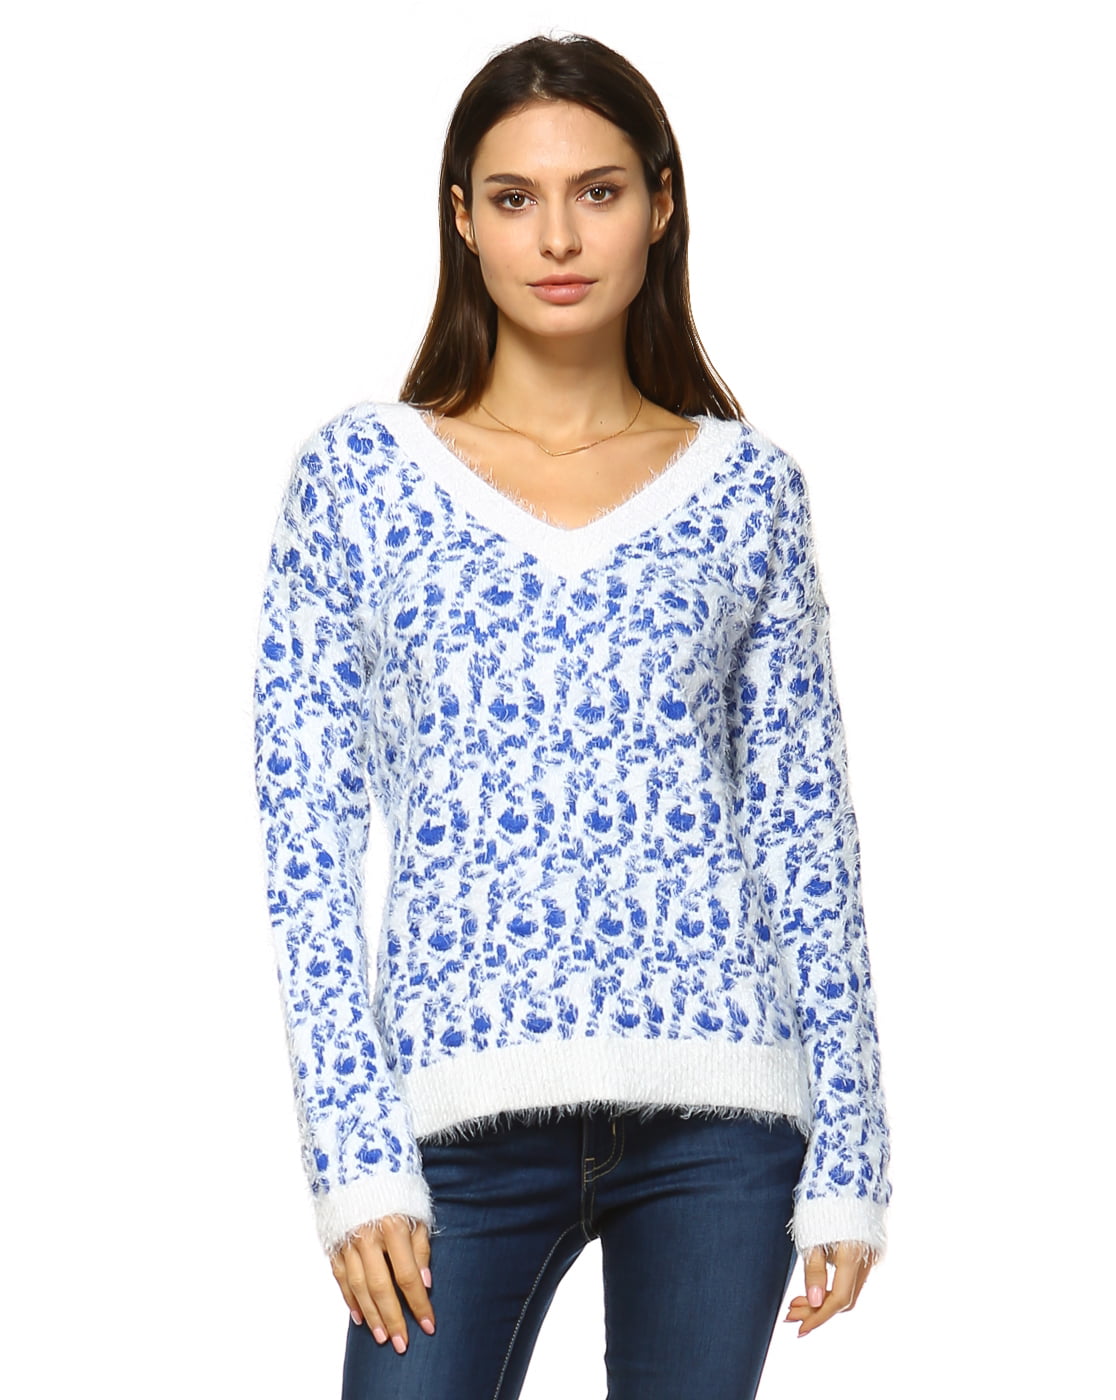 White Mark - White Mark Women's Leopard Sweater soft color tones in this leopard-print sweater